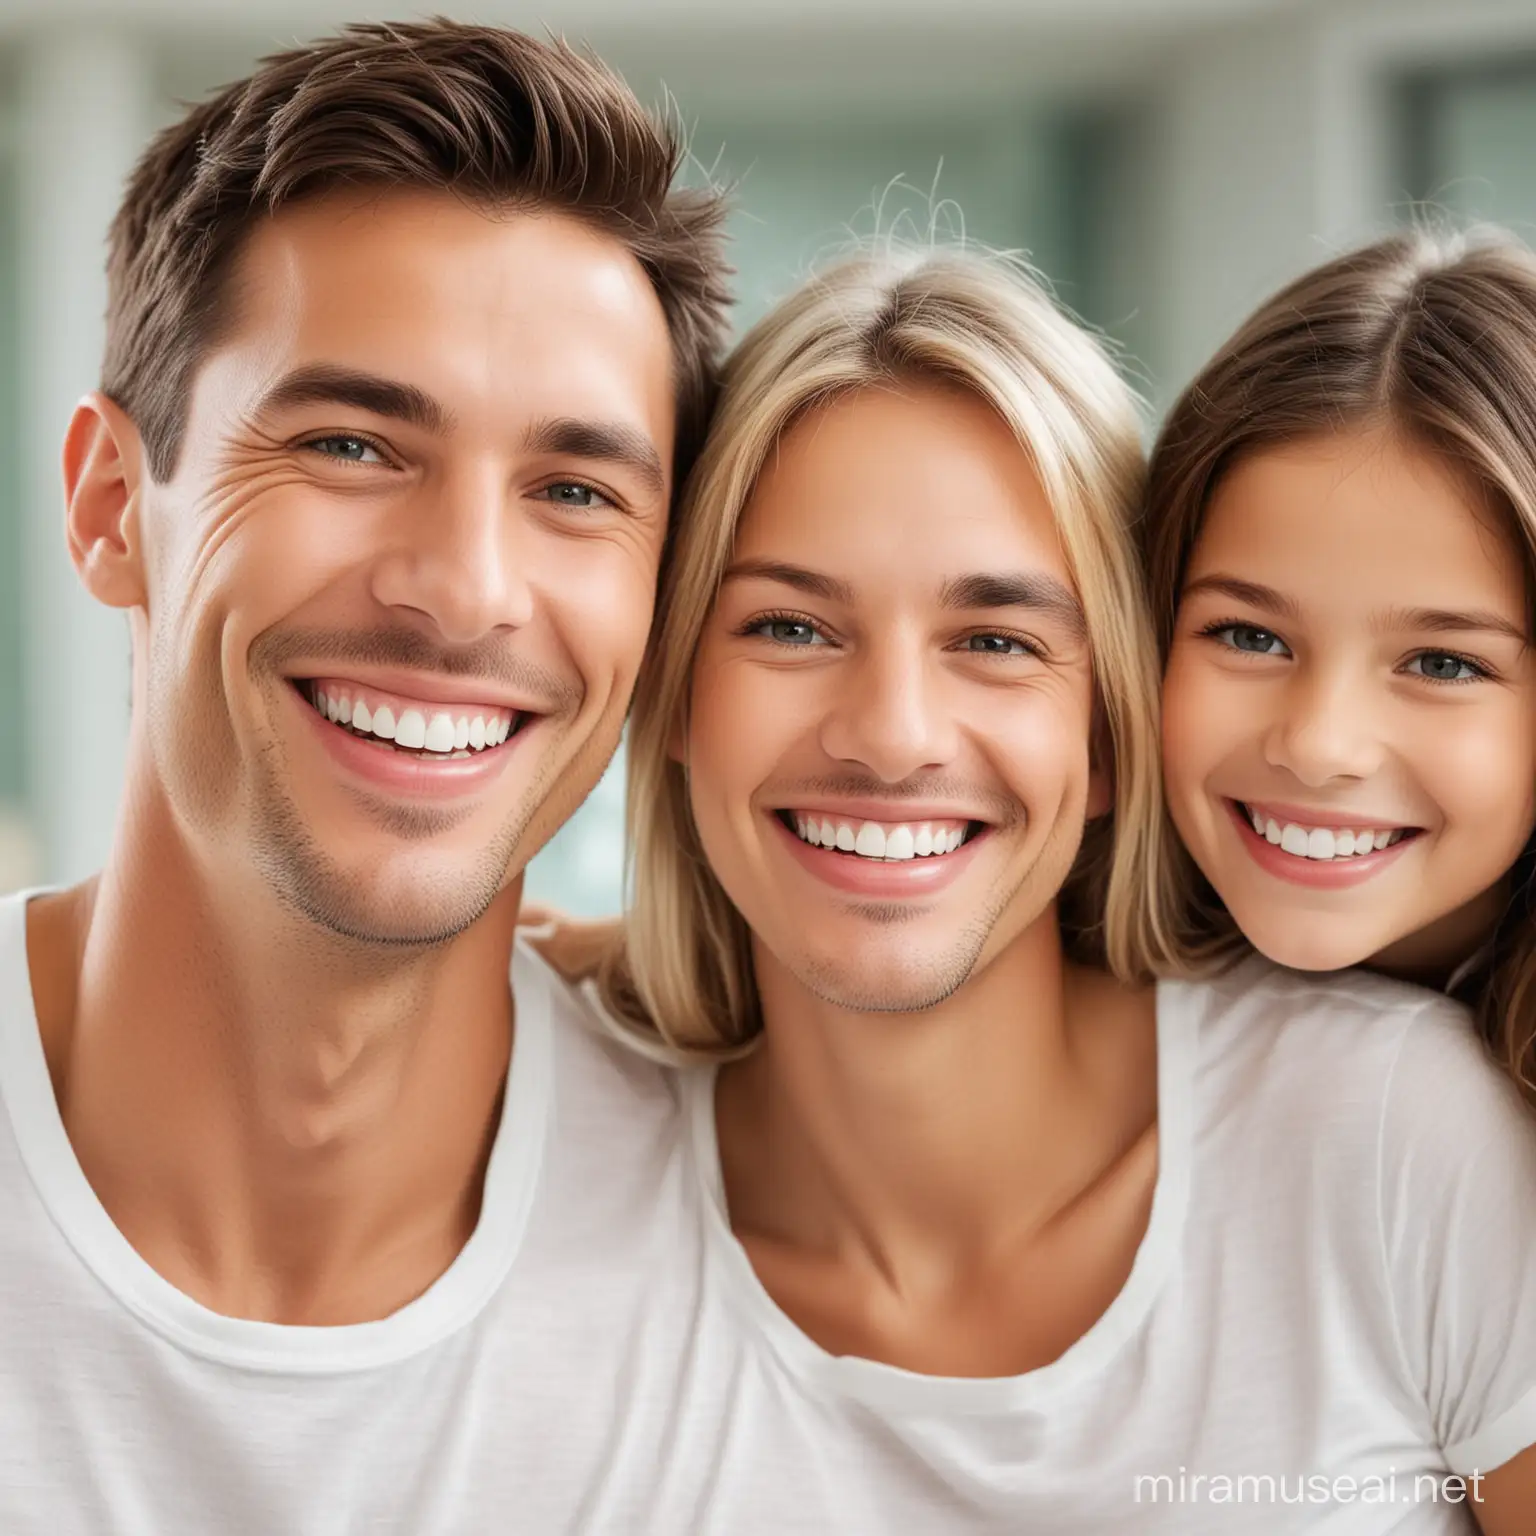 Happy Family Smiling Together with Bright White Teeth